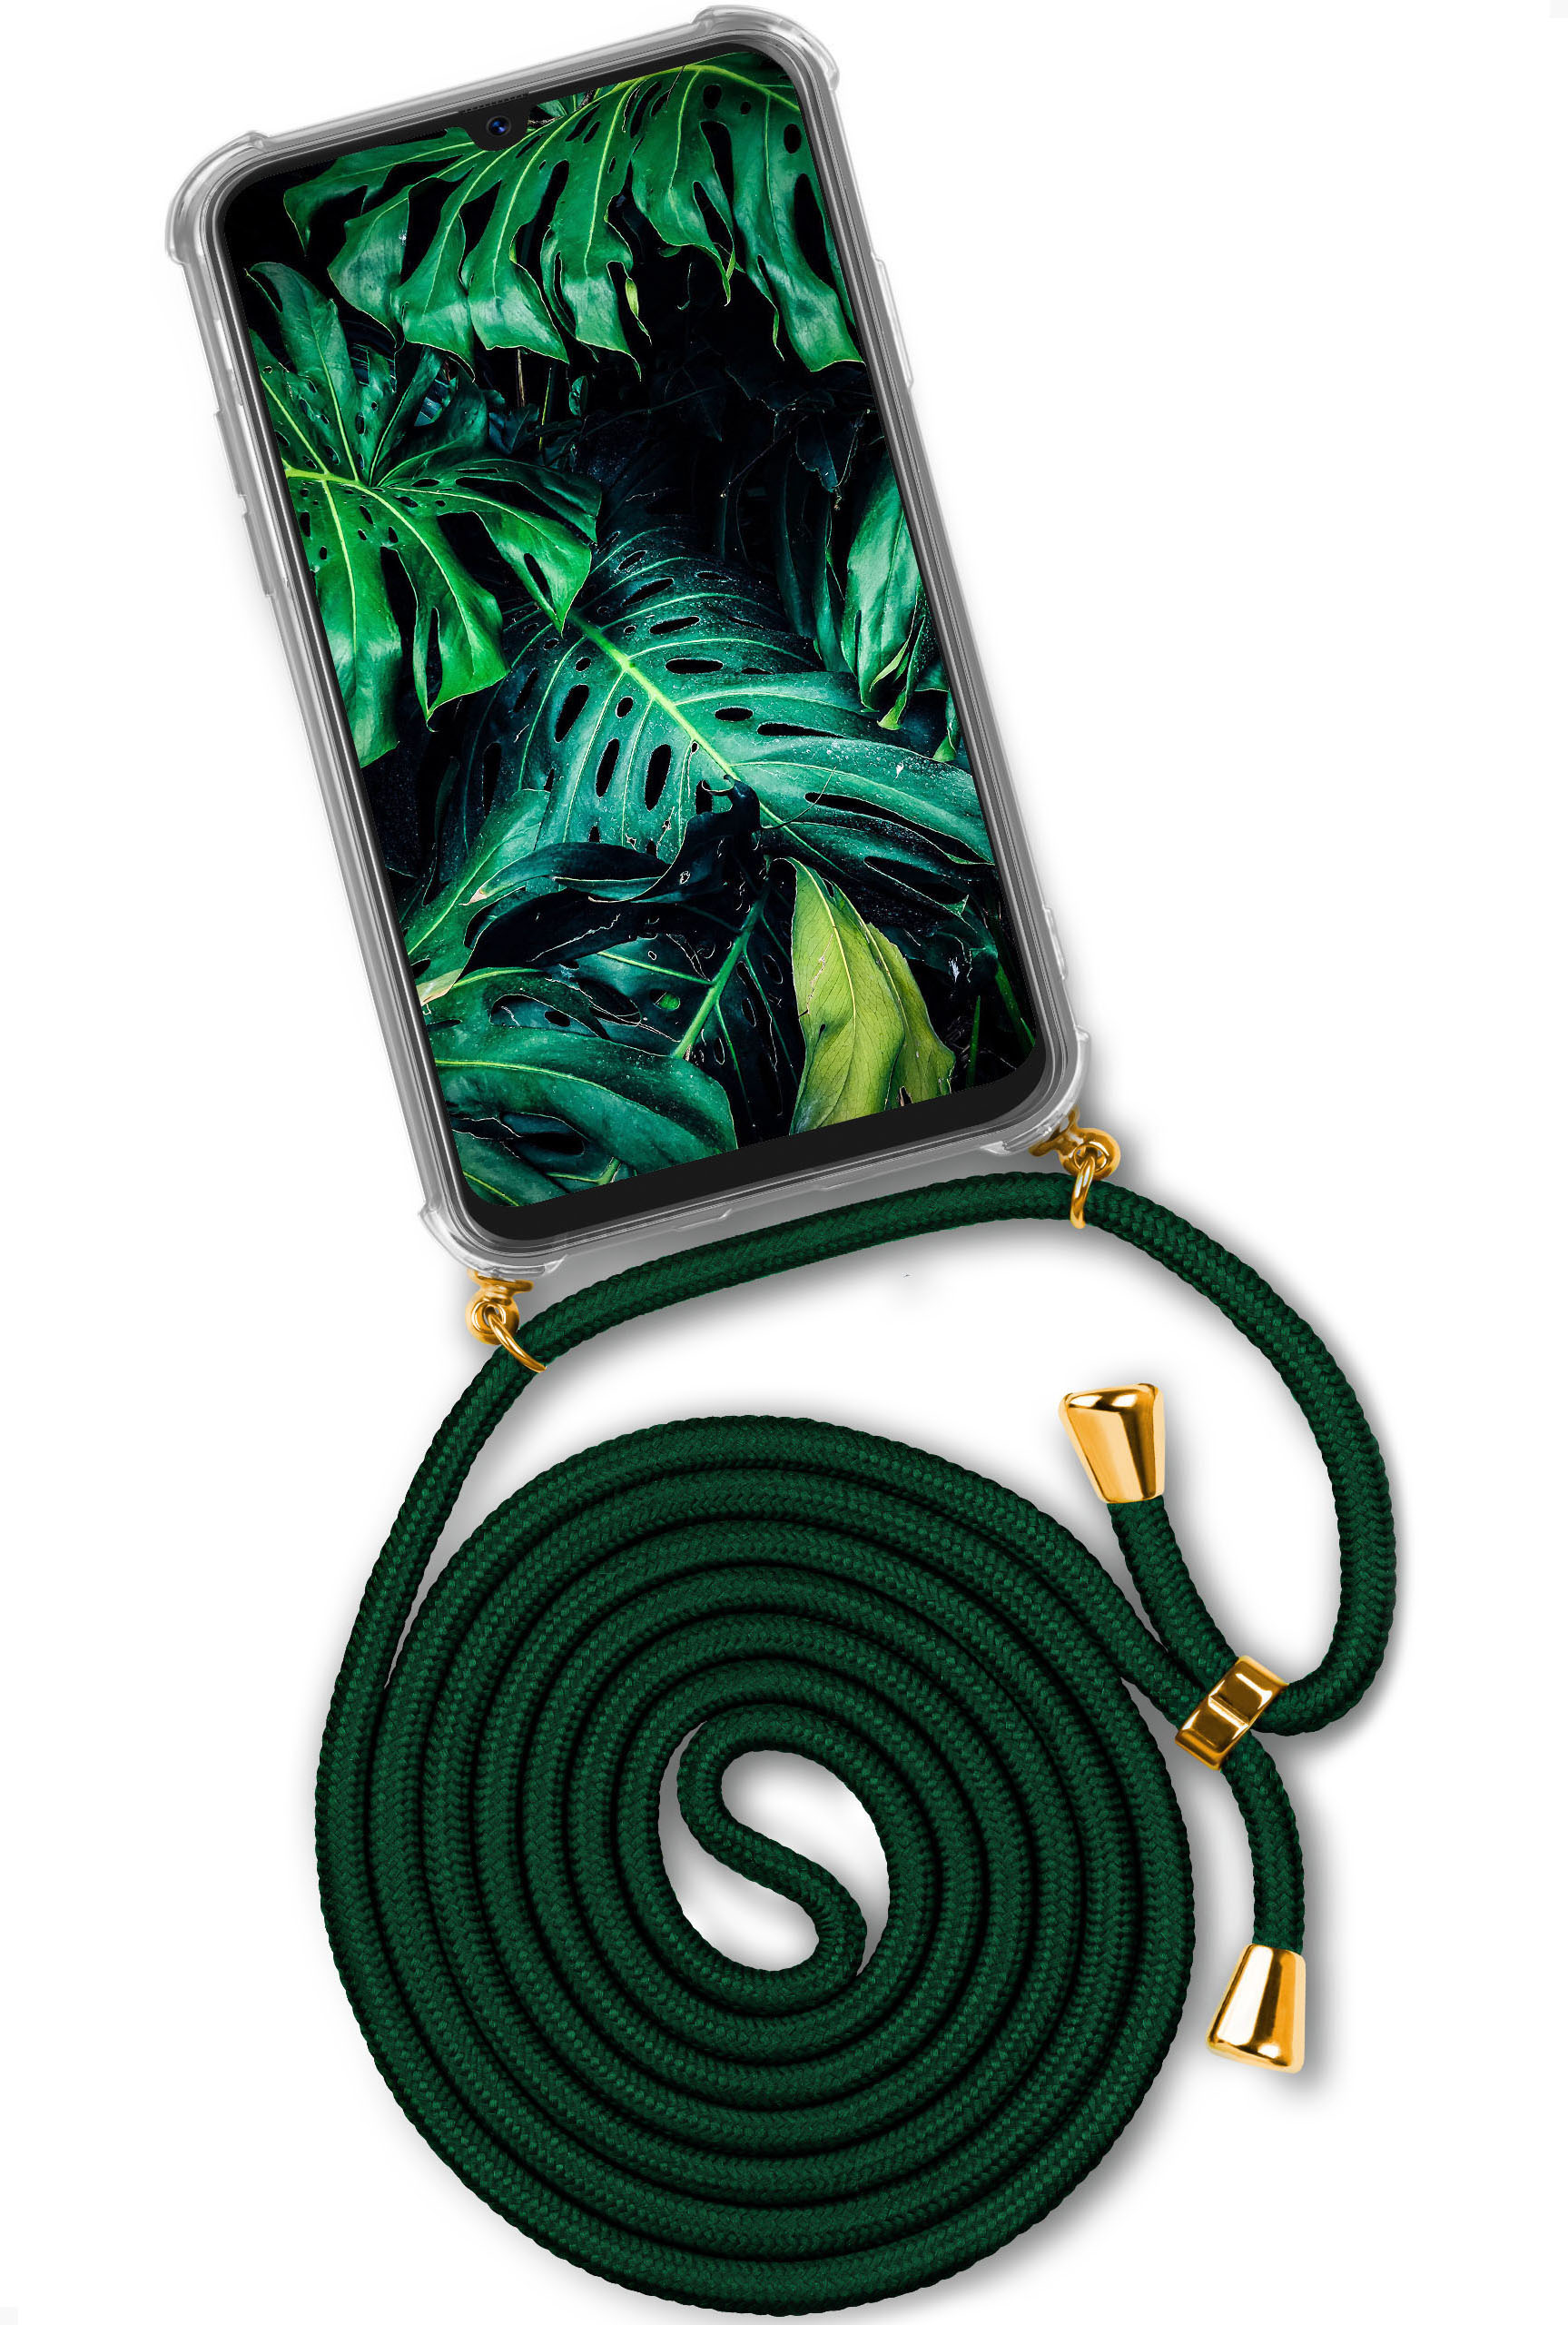 Twist A50 A30s, ONEFLOW Jungle Samsung, Case, Galaxy (Gold) / Backcover, Deepest